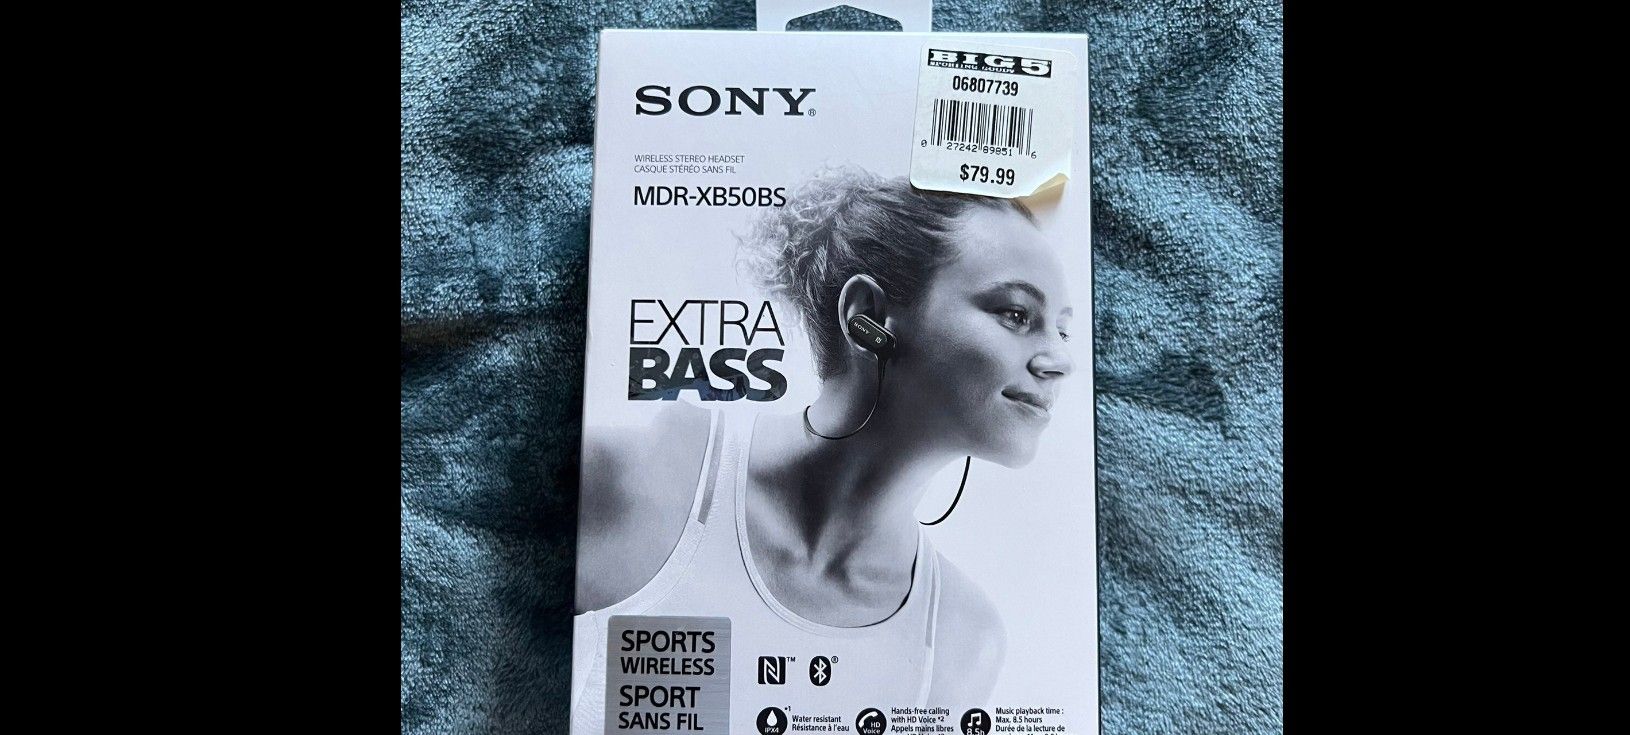 Sony Extra Bass Blue Tooth